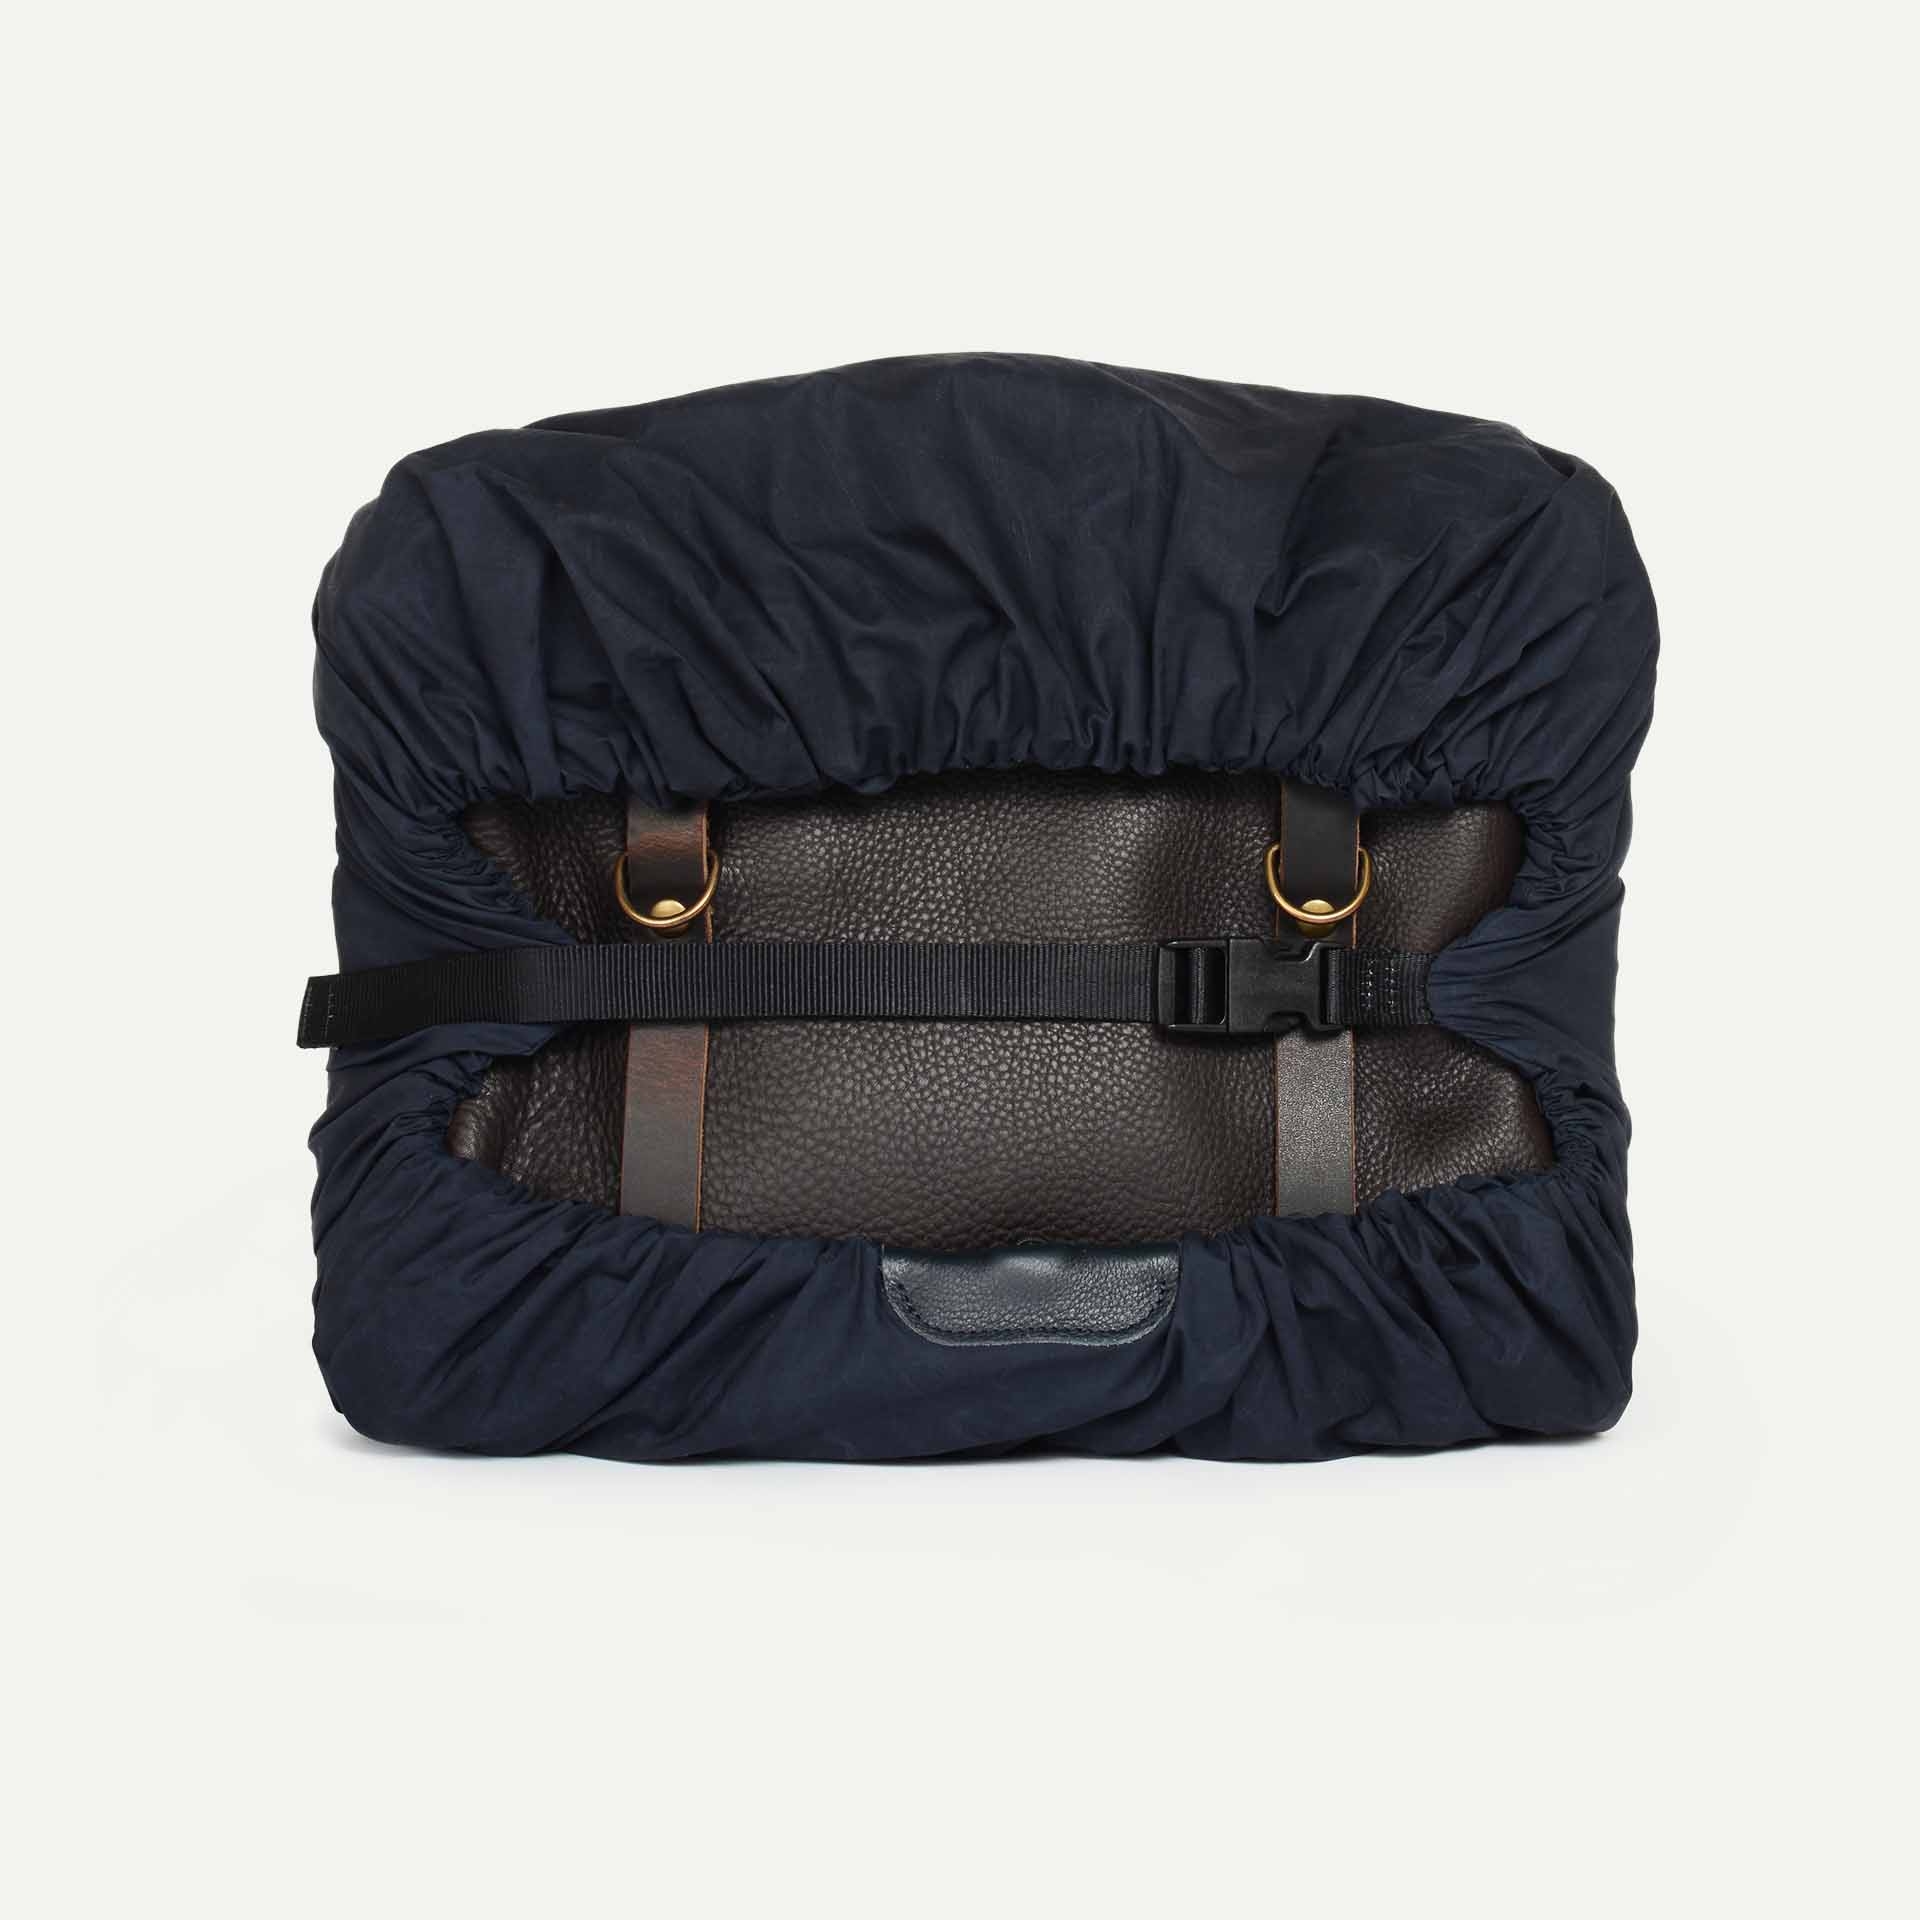 Storm Raincover - Navy Blue (image n°4)